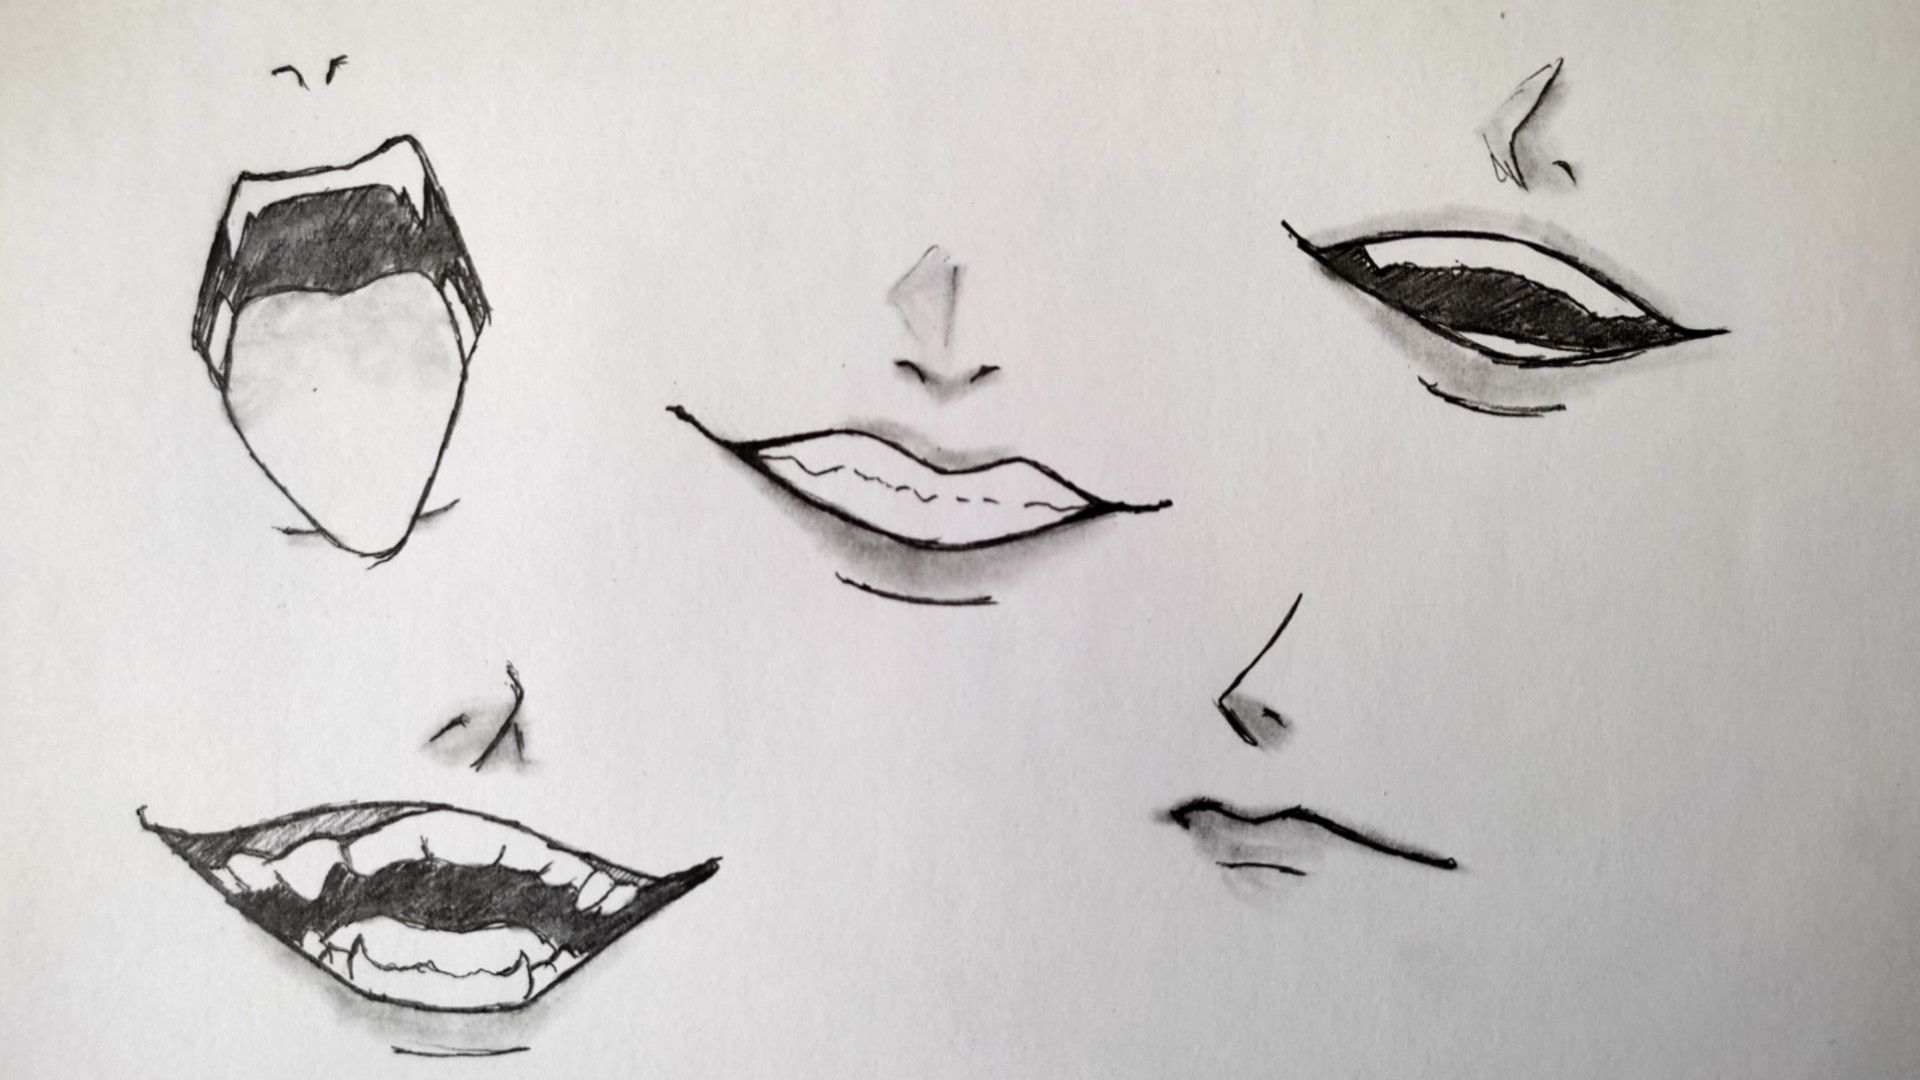 Ceri on Twitter This is my lips drawing tutorial  plz check out it  thanks gt httpstcofKLy7uQ0Ds lt art drawing anime  tutorial httpstcoSDqwlRjenx  X